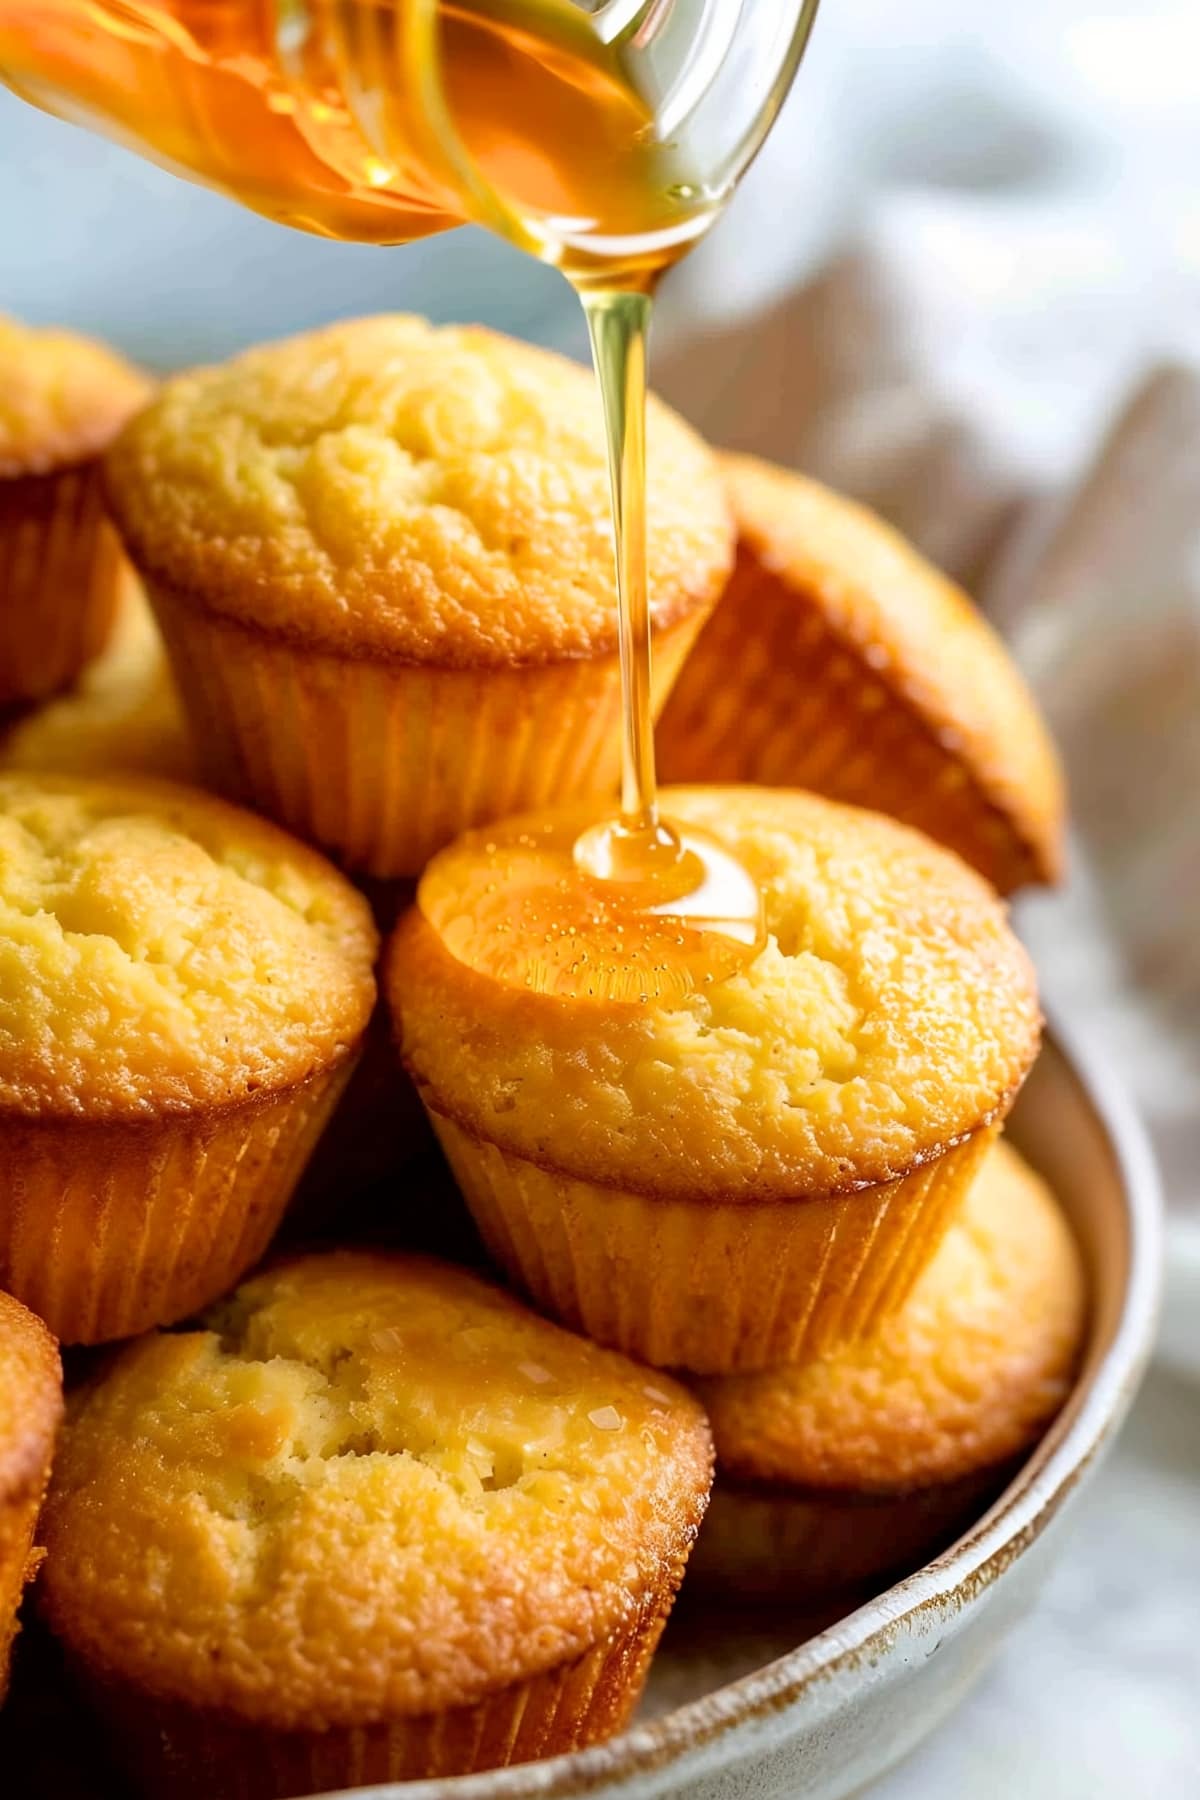 Honey being pourend into a cornbread muffins